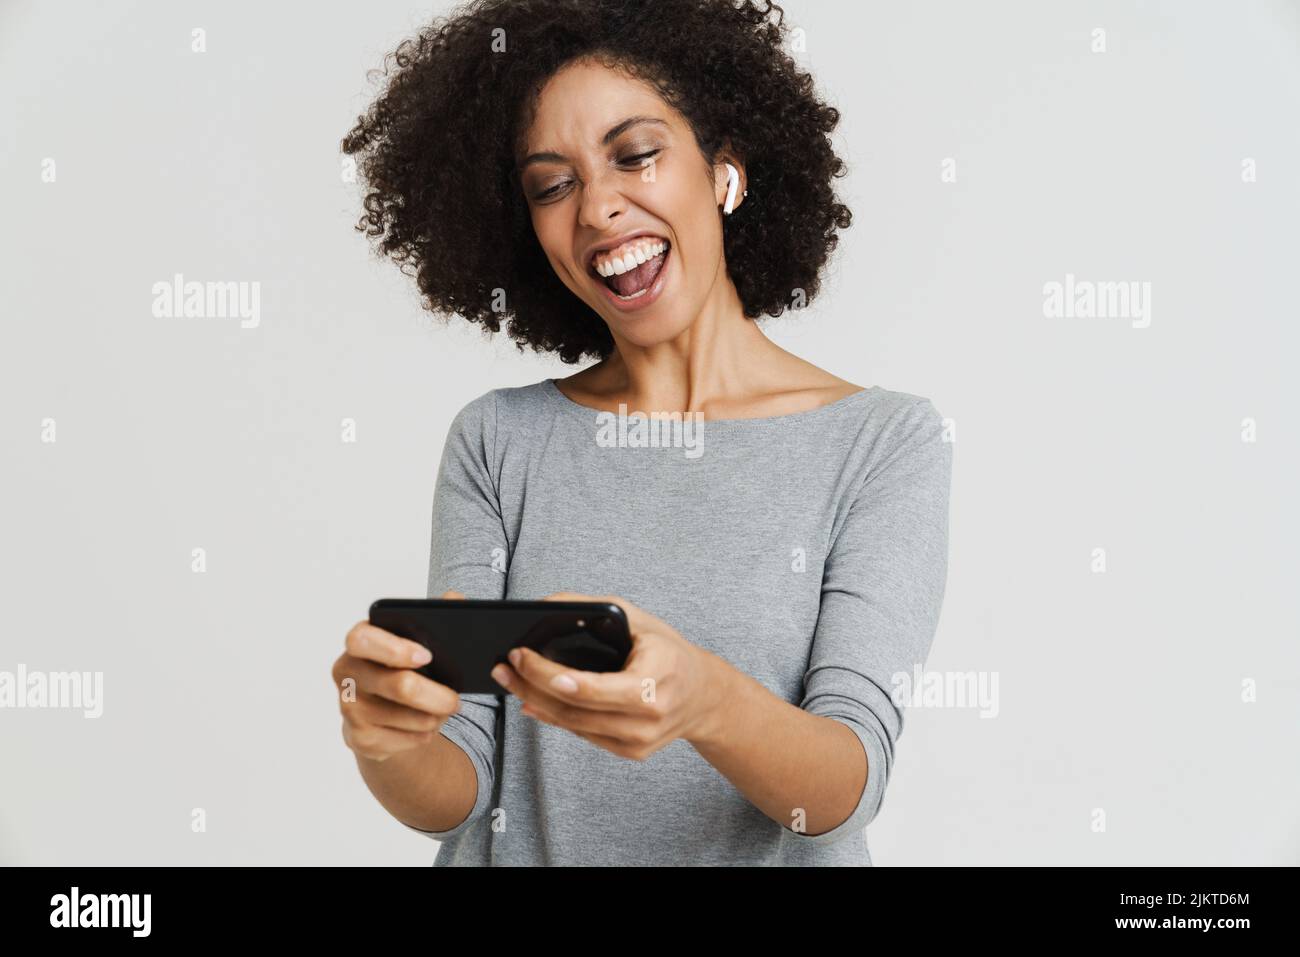 Young black woman in earphones smiling and using mobile phone isolated over white background Stock Photo